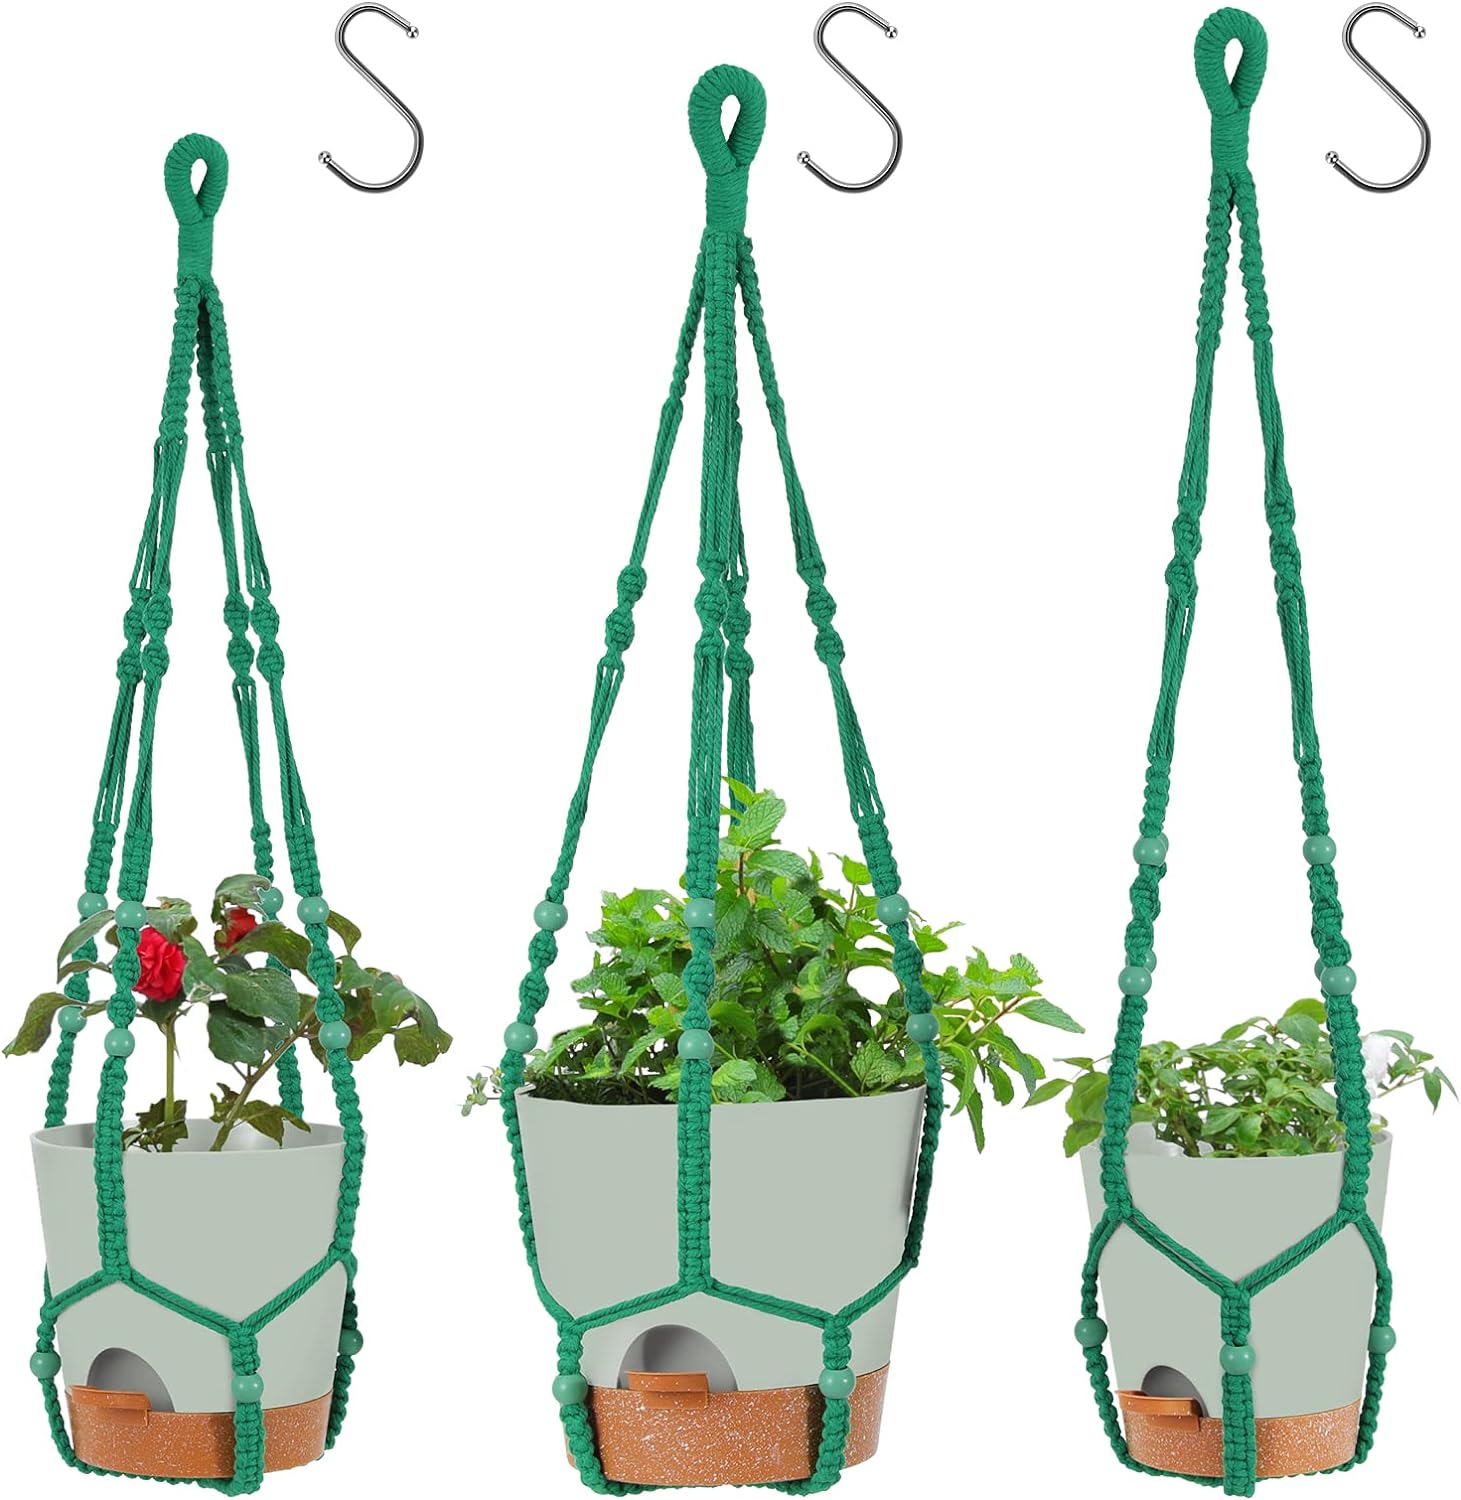 GARDIFE Hanging Planters for Indoor Plants,3Pcs Hanging Basket for Indoor Outdoor Boho Home Decor,Macrame Plant Hanger,35 Inches,4mm, Ivory,Self Watering Planters, 9/8/7.5 Inch,Green&Green